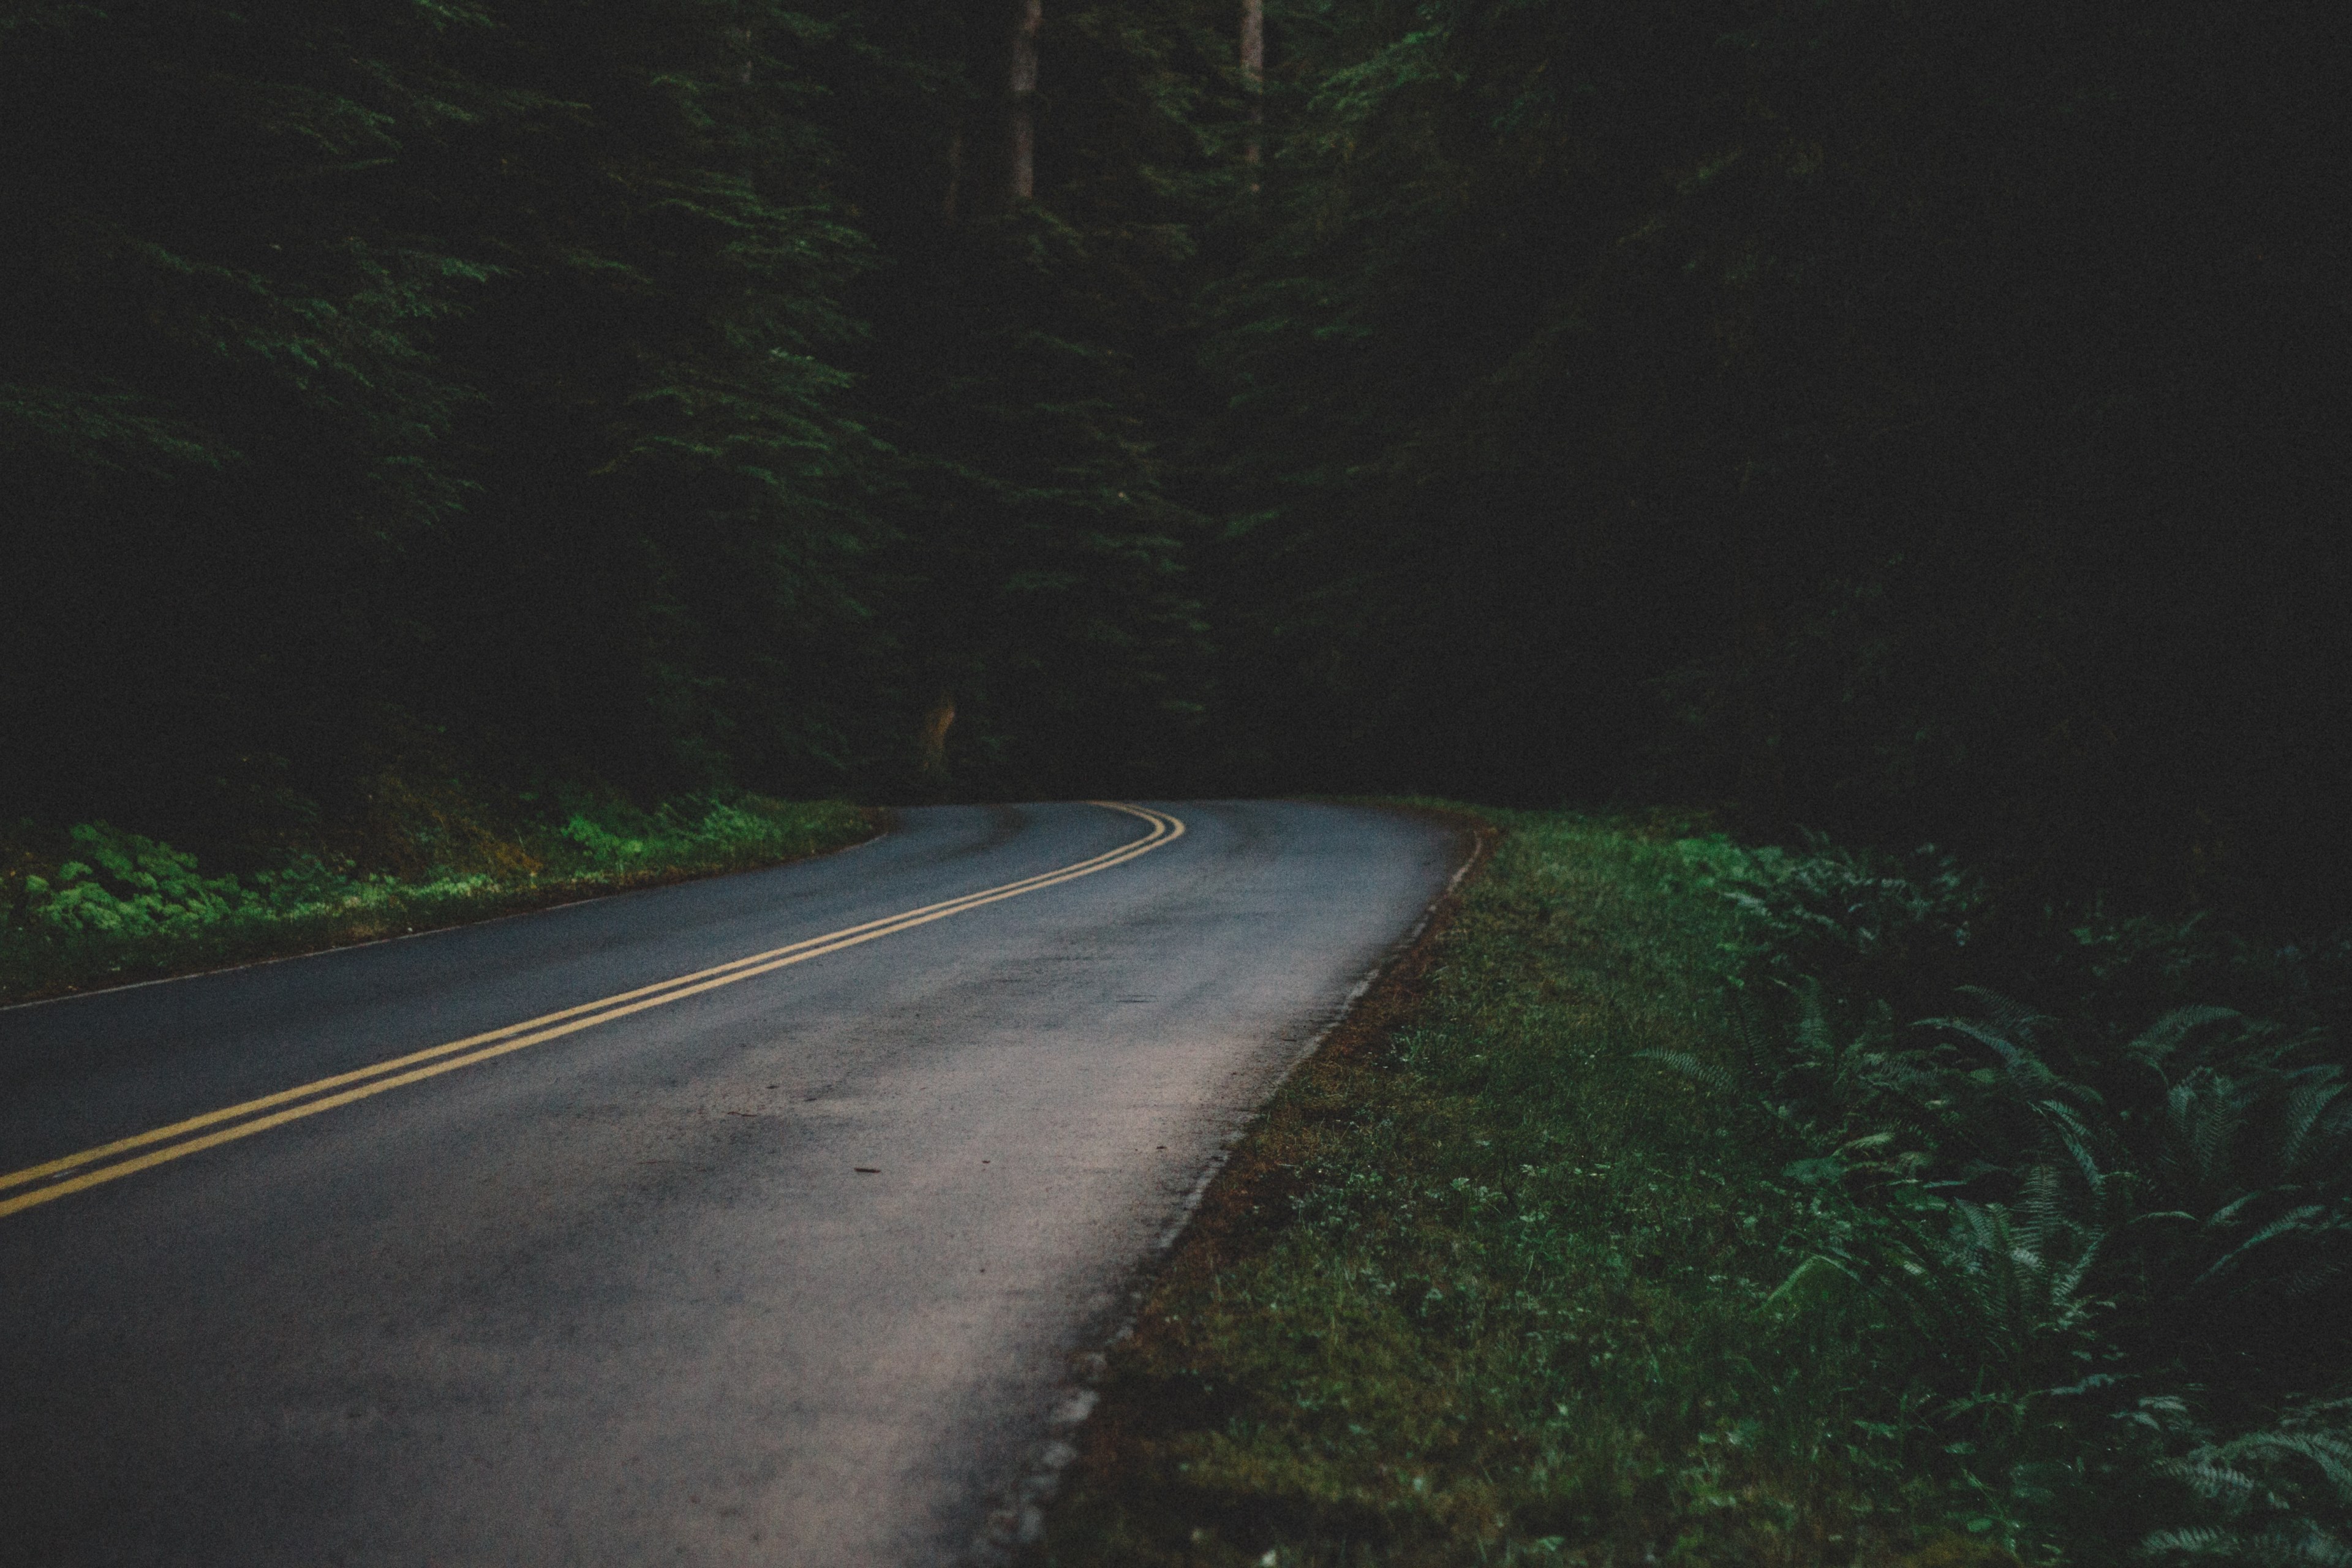 Wallpaper / open road winds through lush green trees in the forest, road bend in a dark forest 4k wallpaper free download